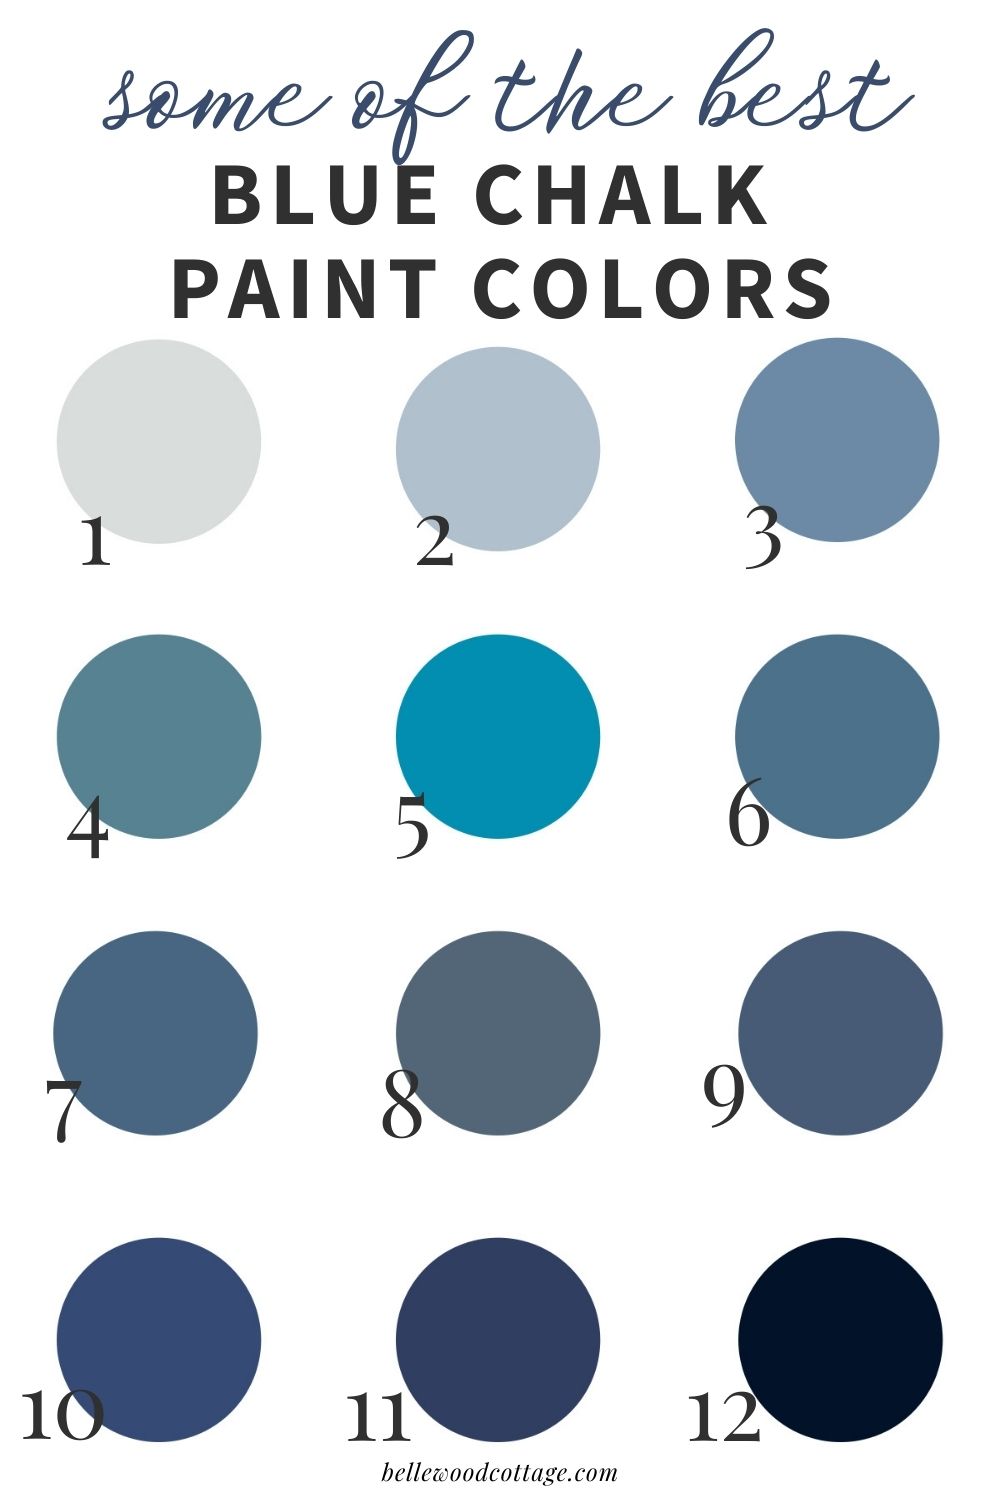 A collage of blue paint swatches with the words, "Some of the Best Blue Chalk Paint Colors".